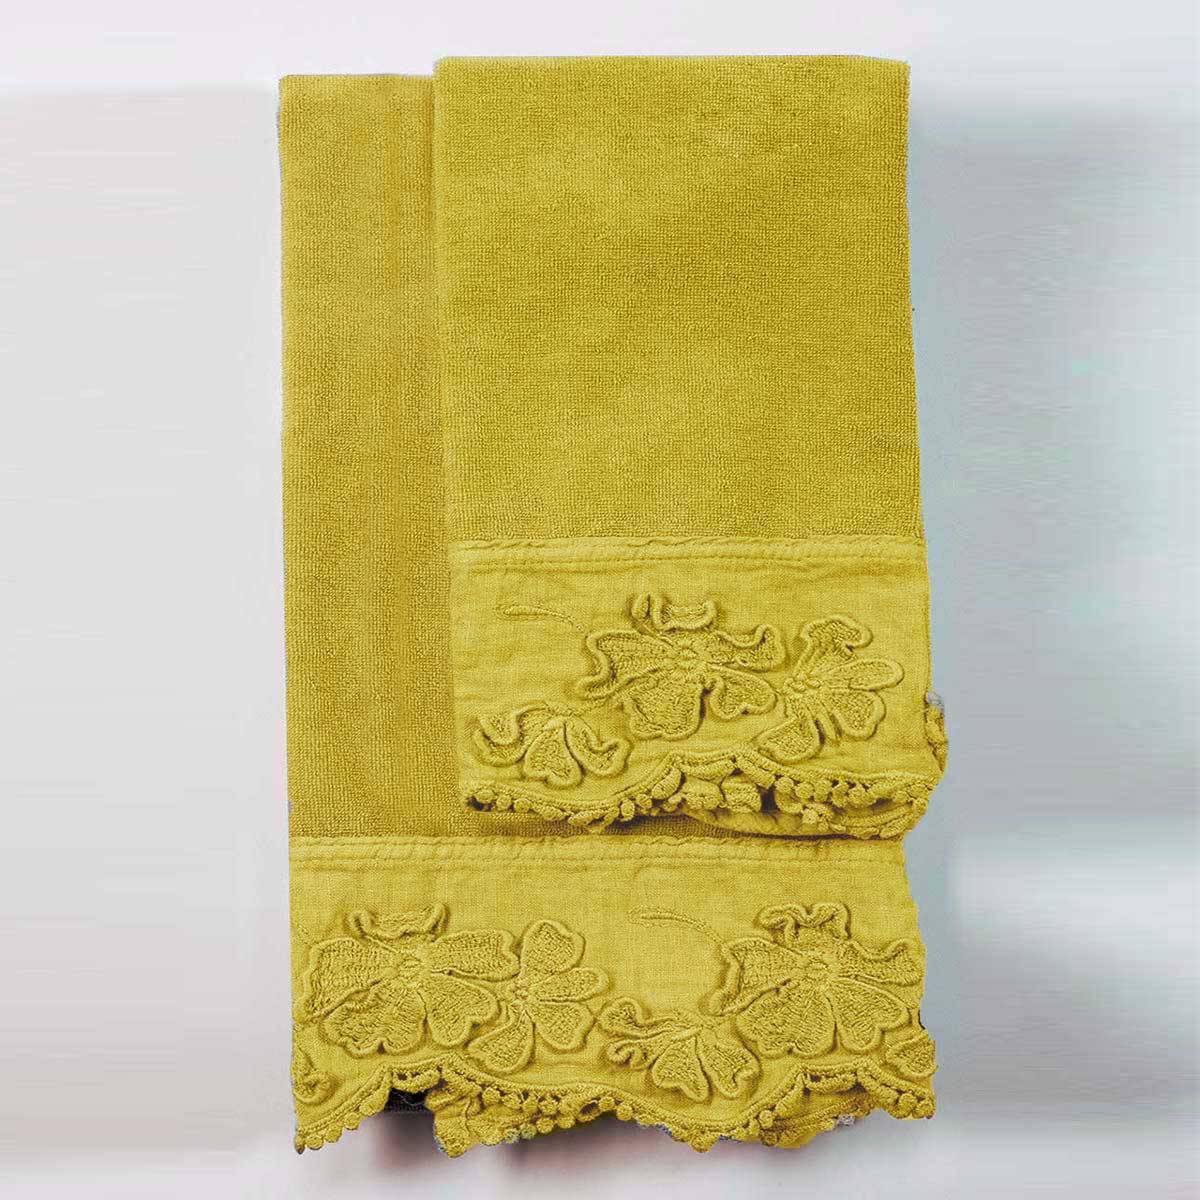 Petals embroidered terry toweling face + guest towel set * while stocks last